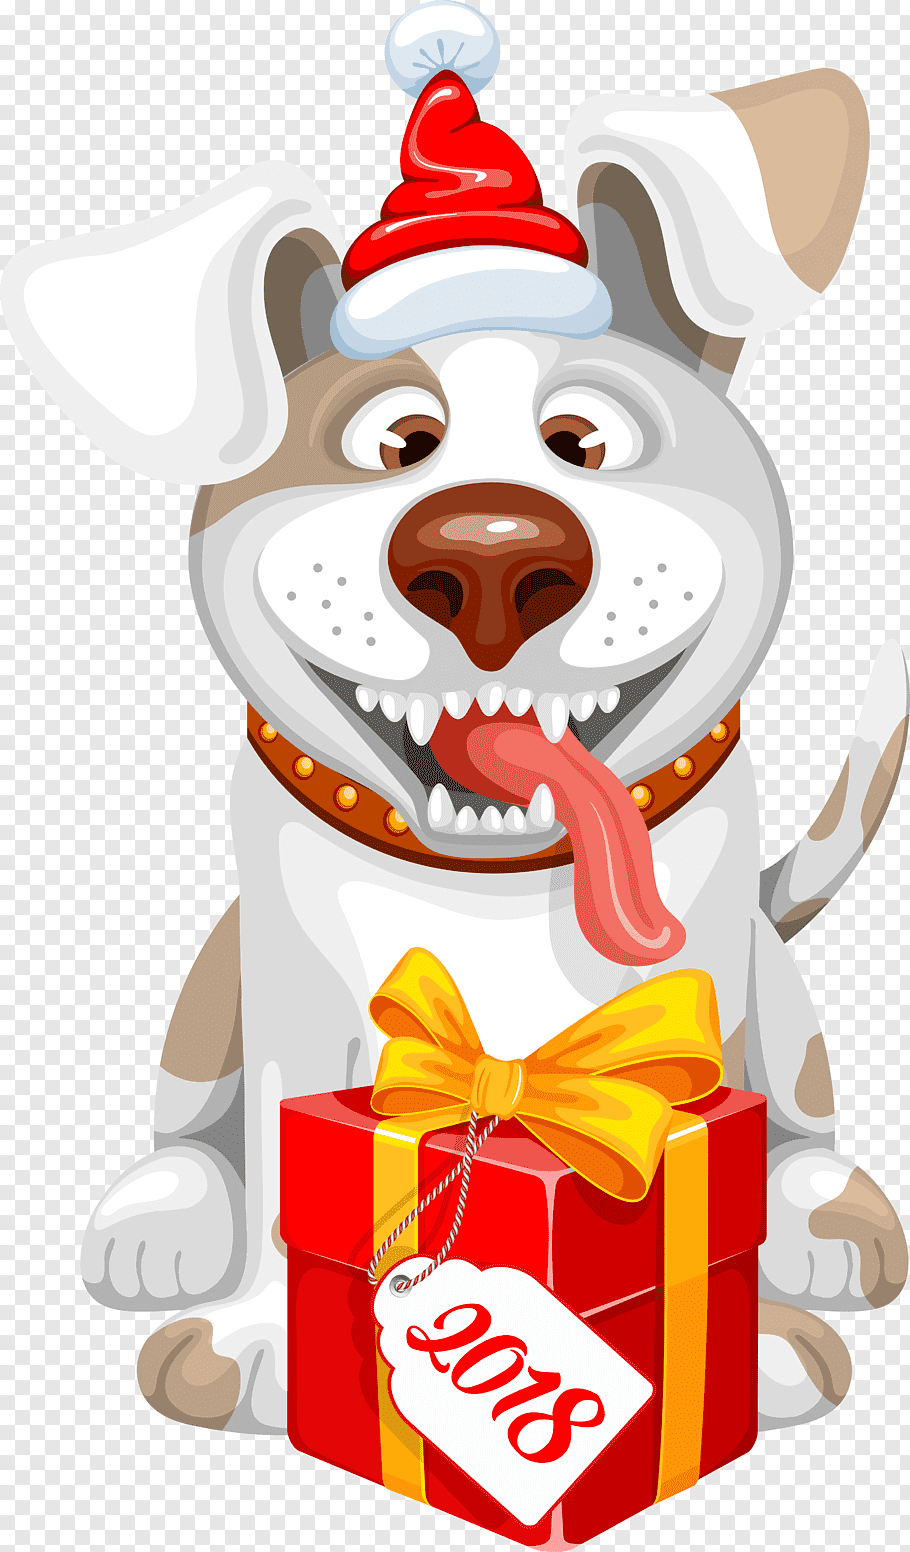 2018 Year Of The Dog cutout PNG & clipart images.